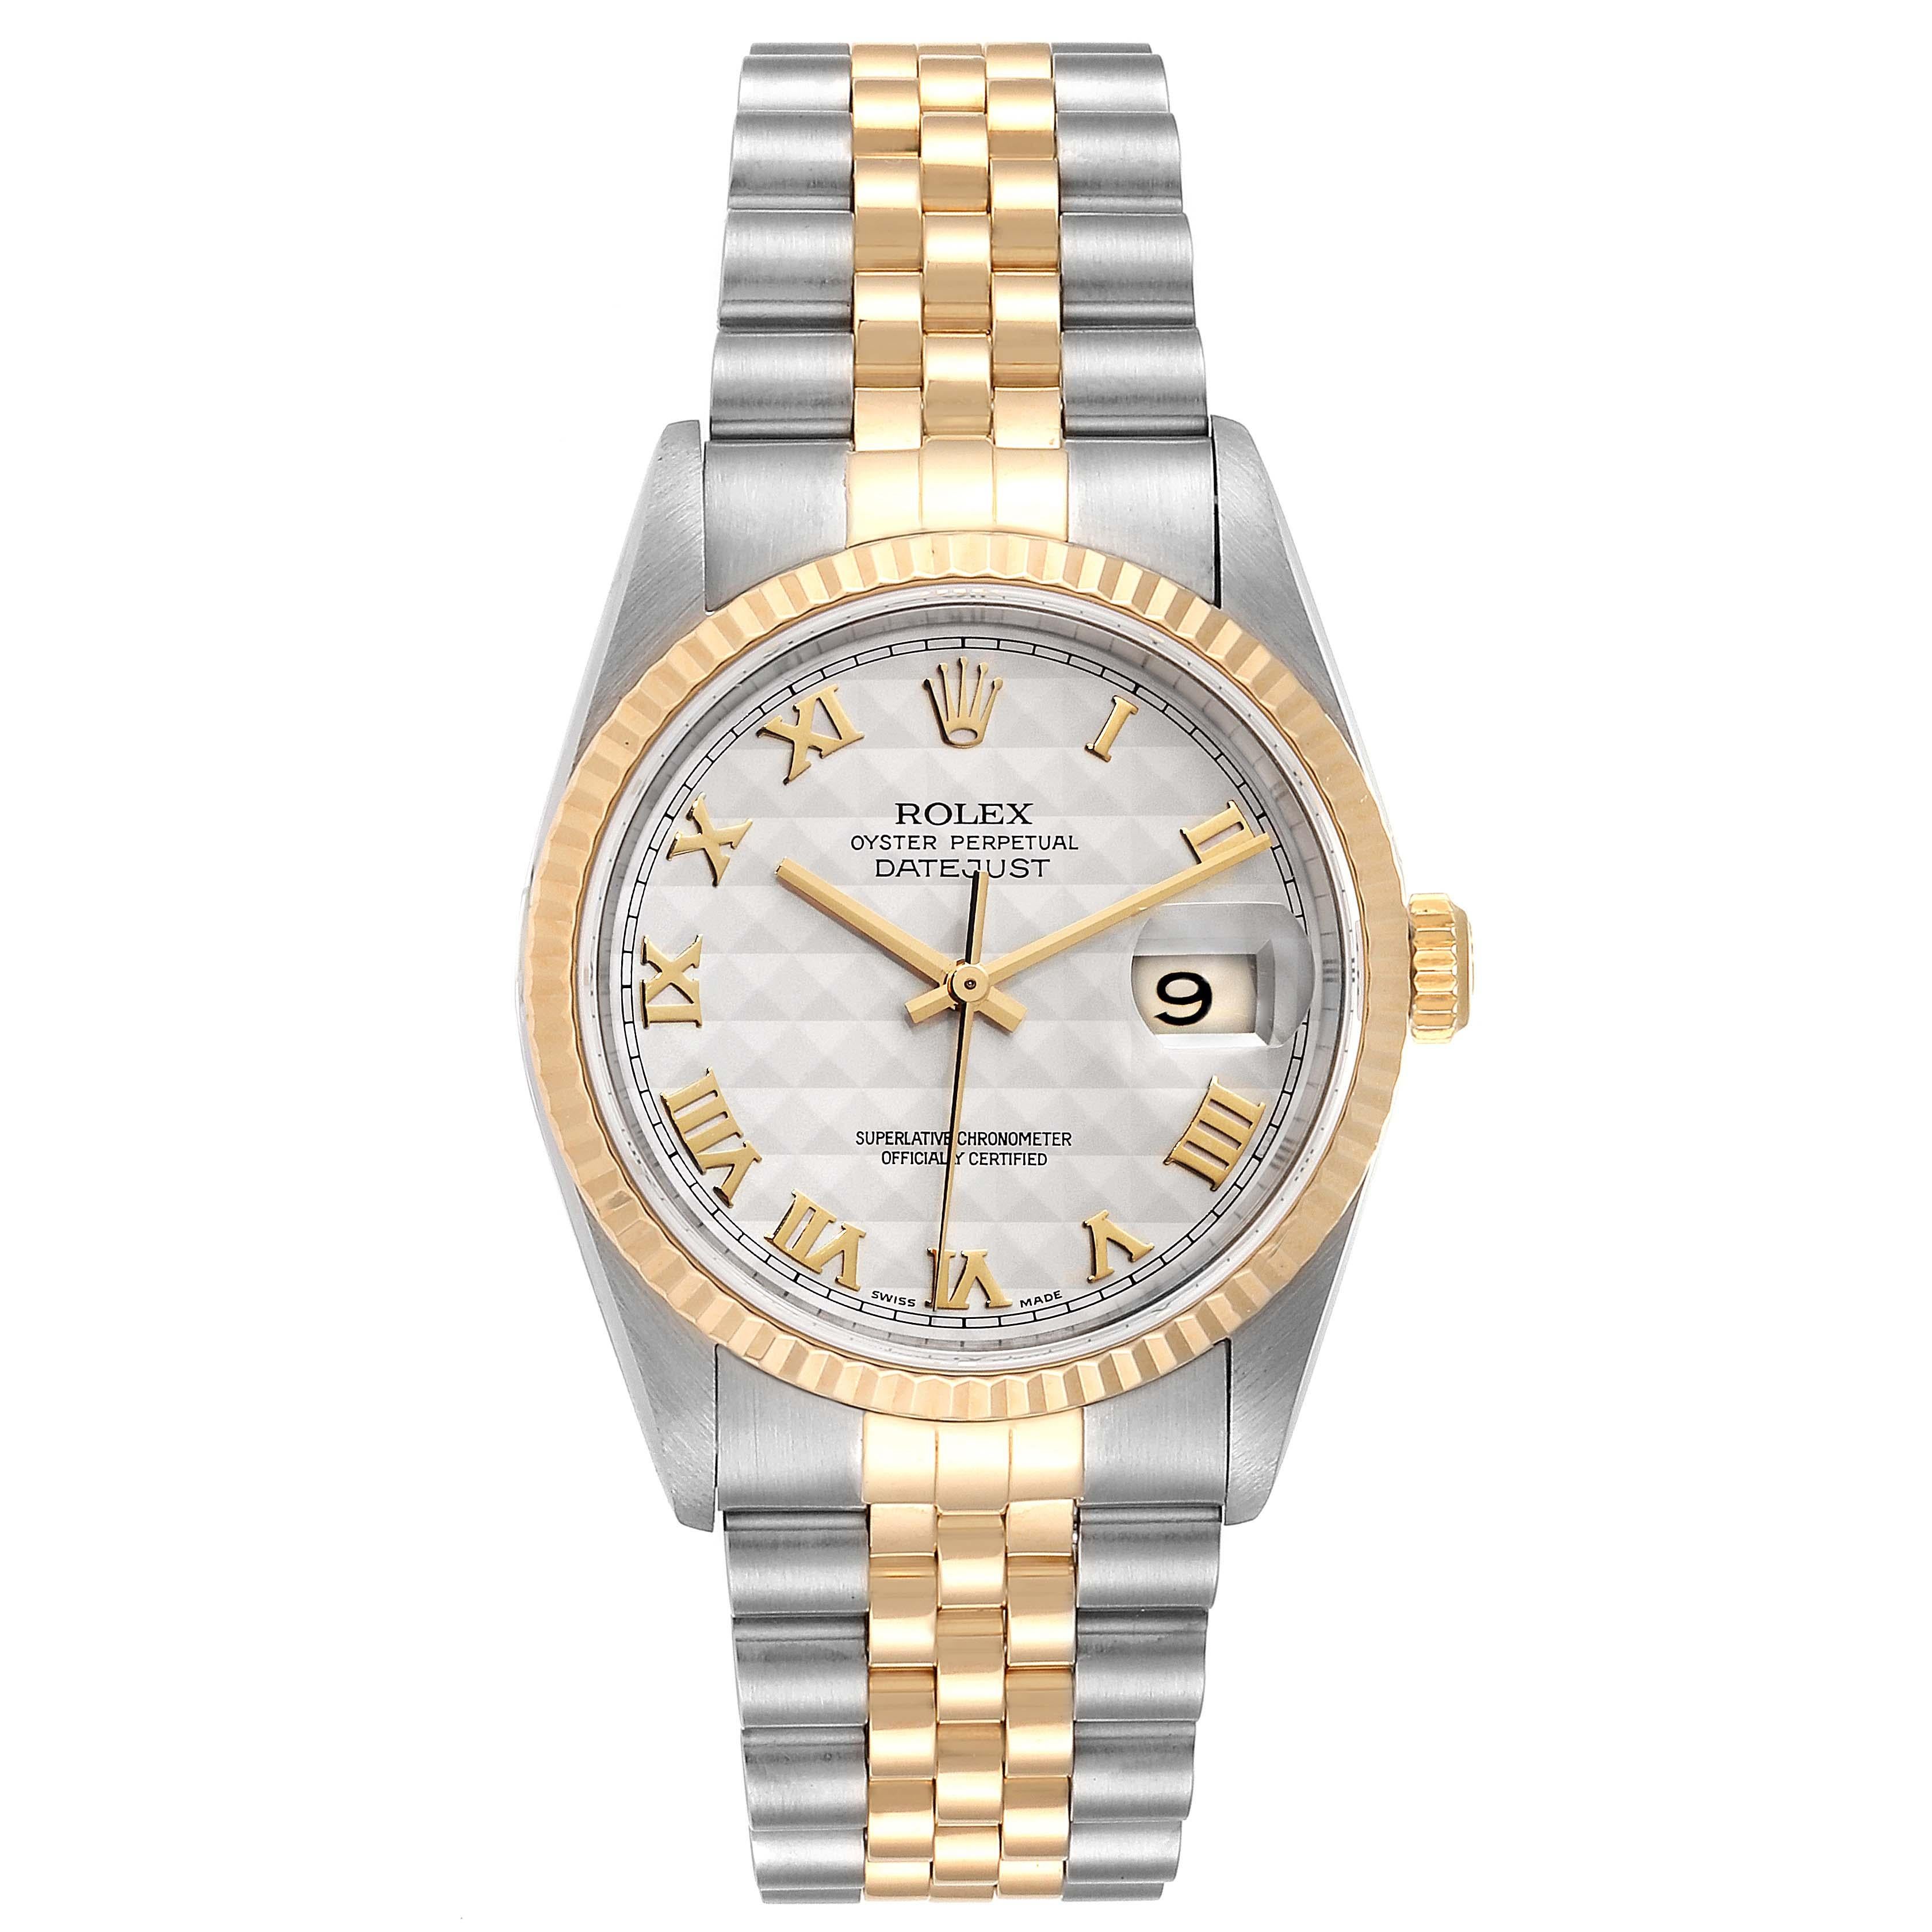 Rolex Datejust Steel Yellow Gold Pyramid Roman Dial Mens Watch 16233. Officially certified chronometer self-winding movement. Stainless steel case 36 mm in diameter. Rolex logo on a 18K yellow gold crown. 18k yellow gold fluted bezel. Scratch